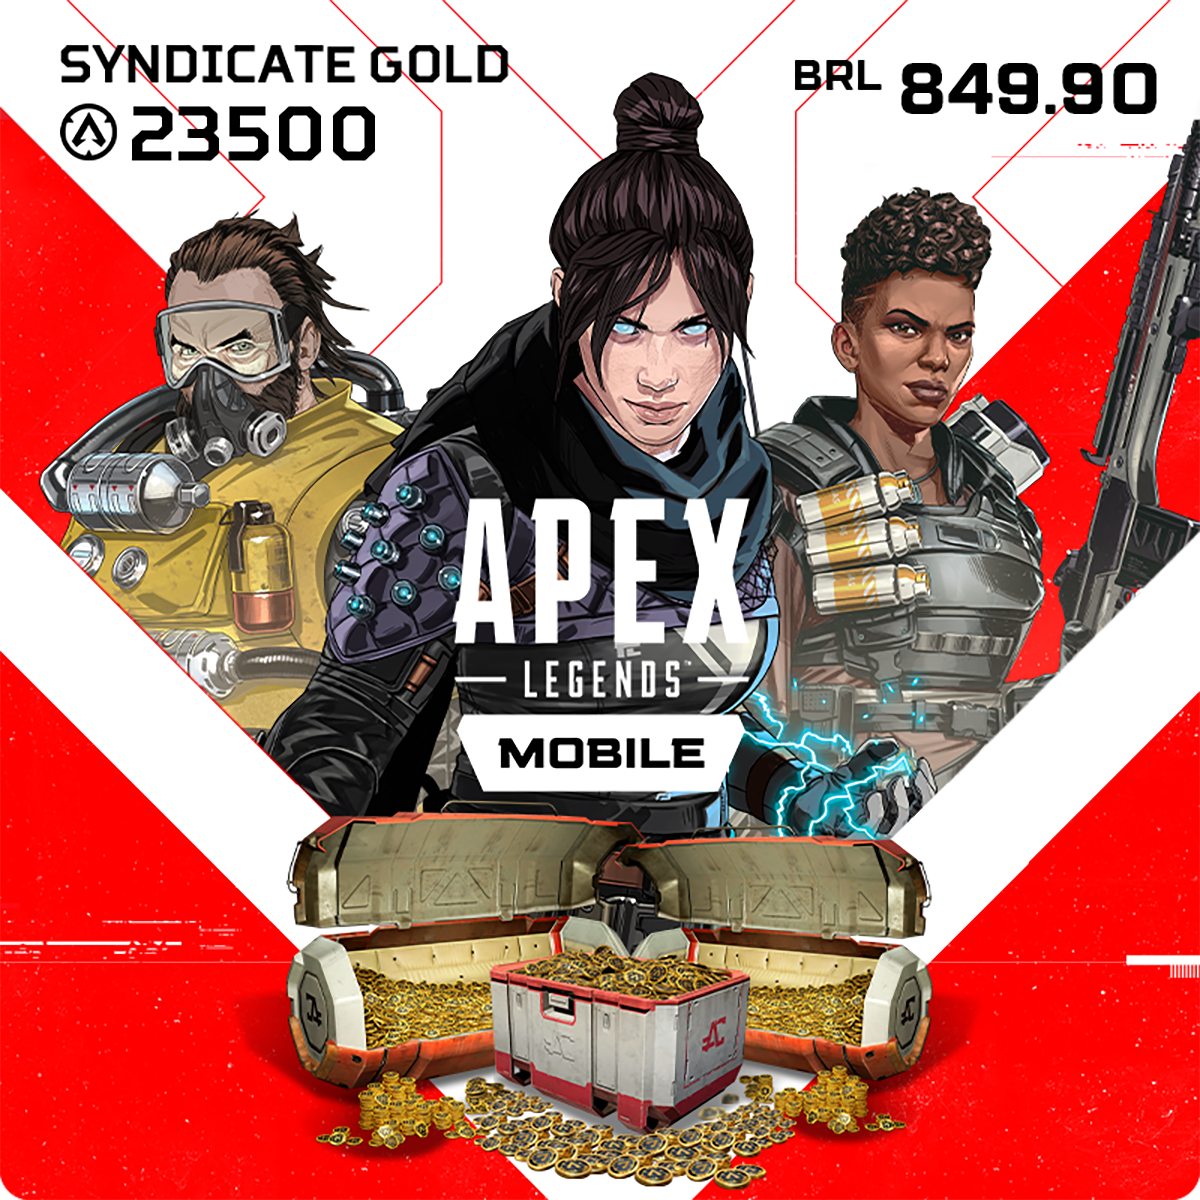 Apex Legends Mobile 23500 Syndicate Gold